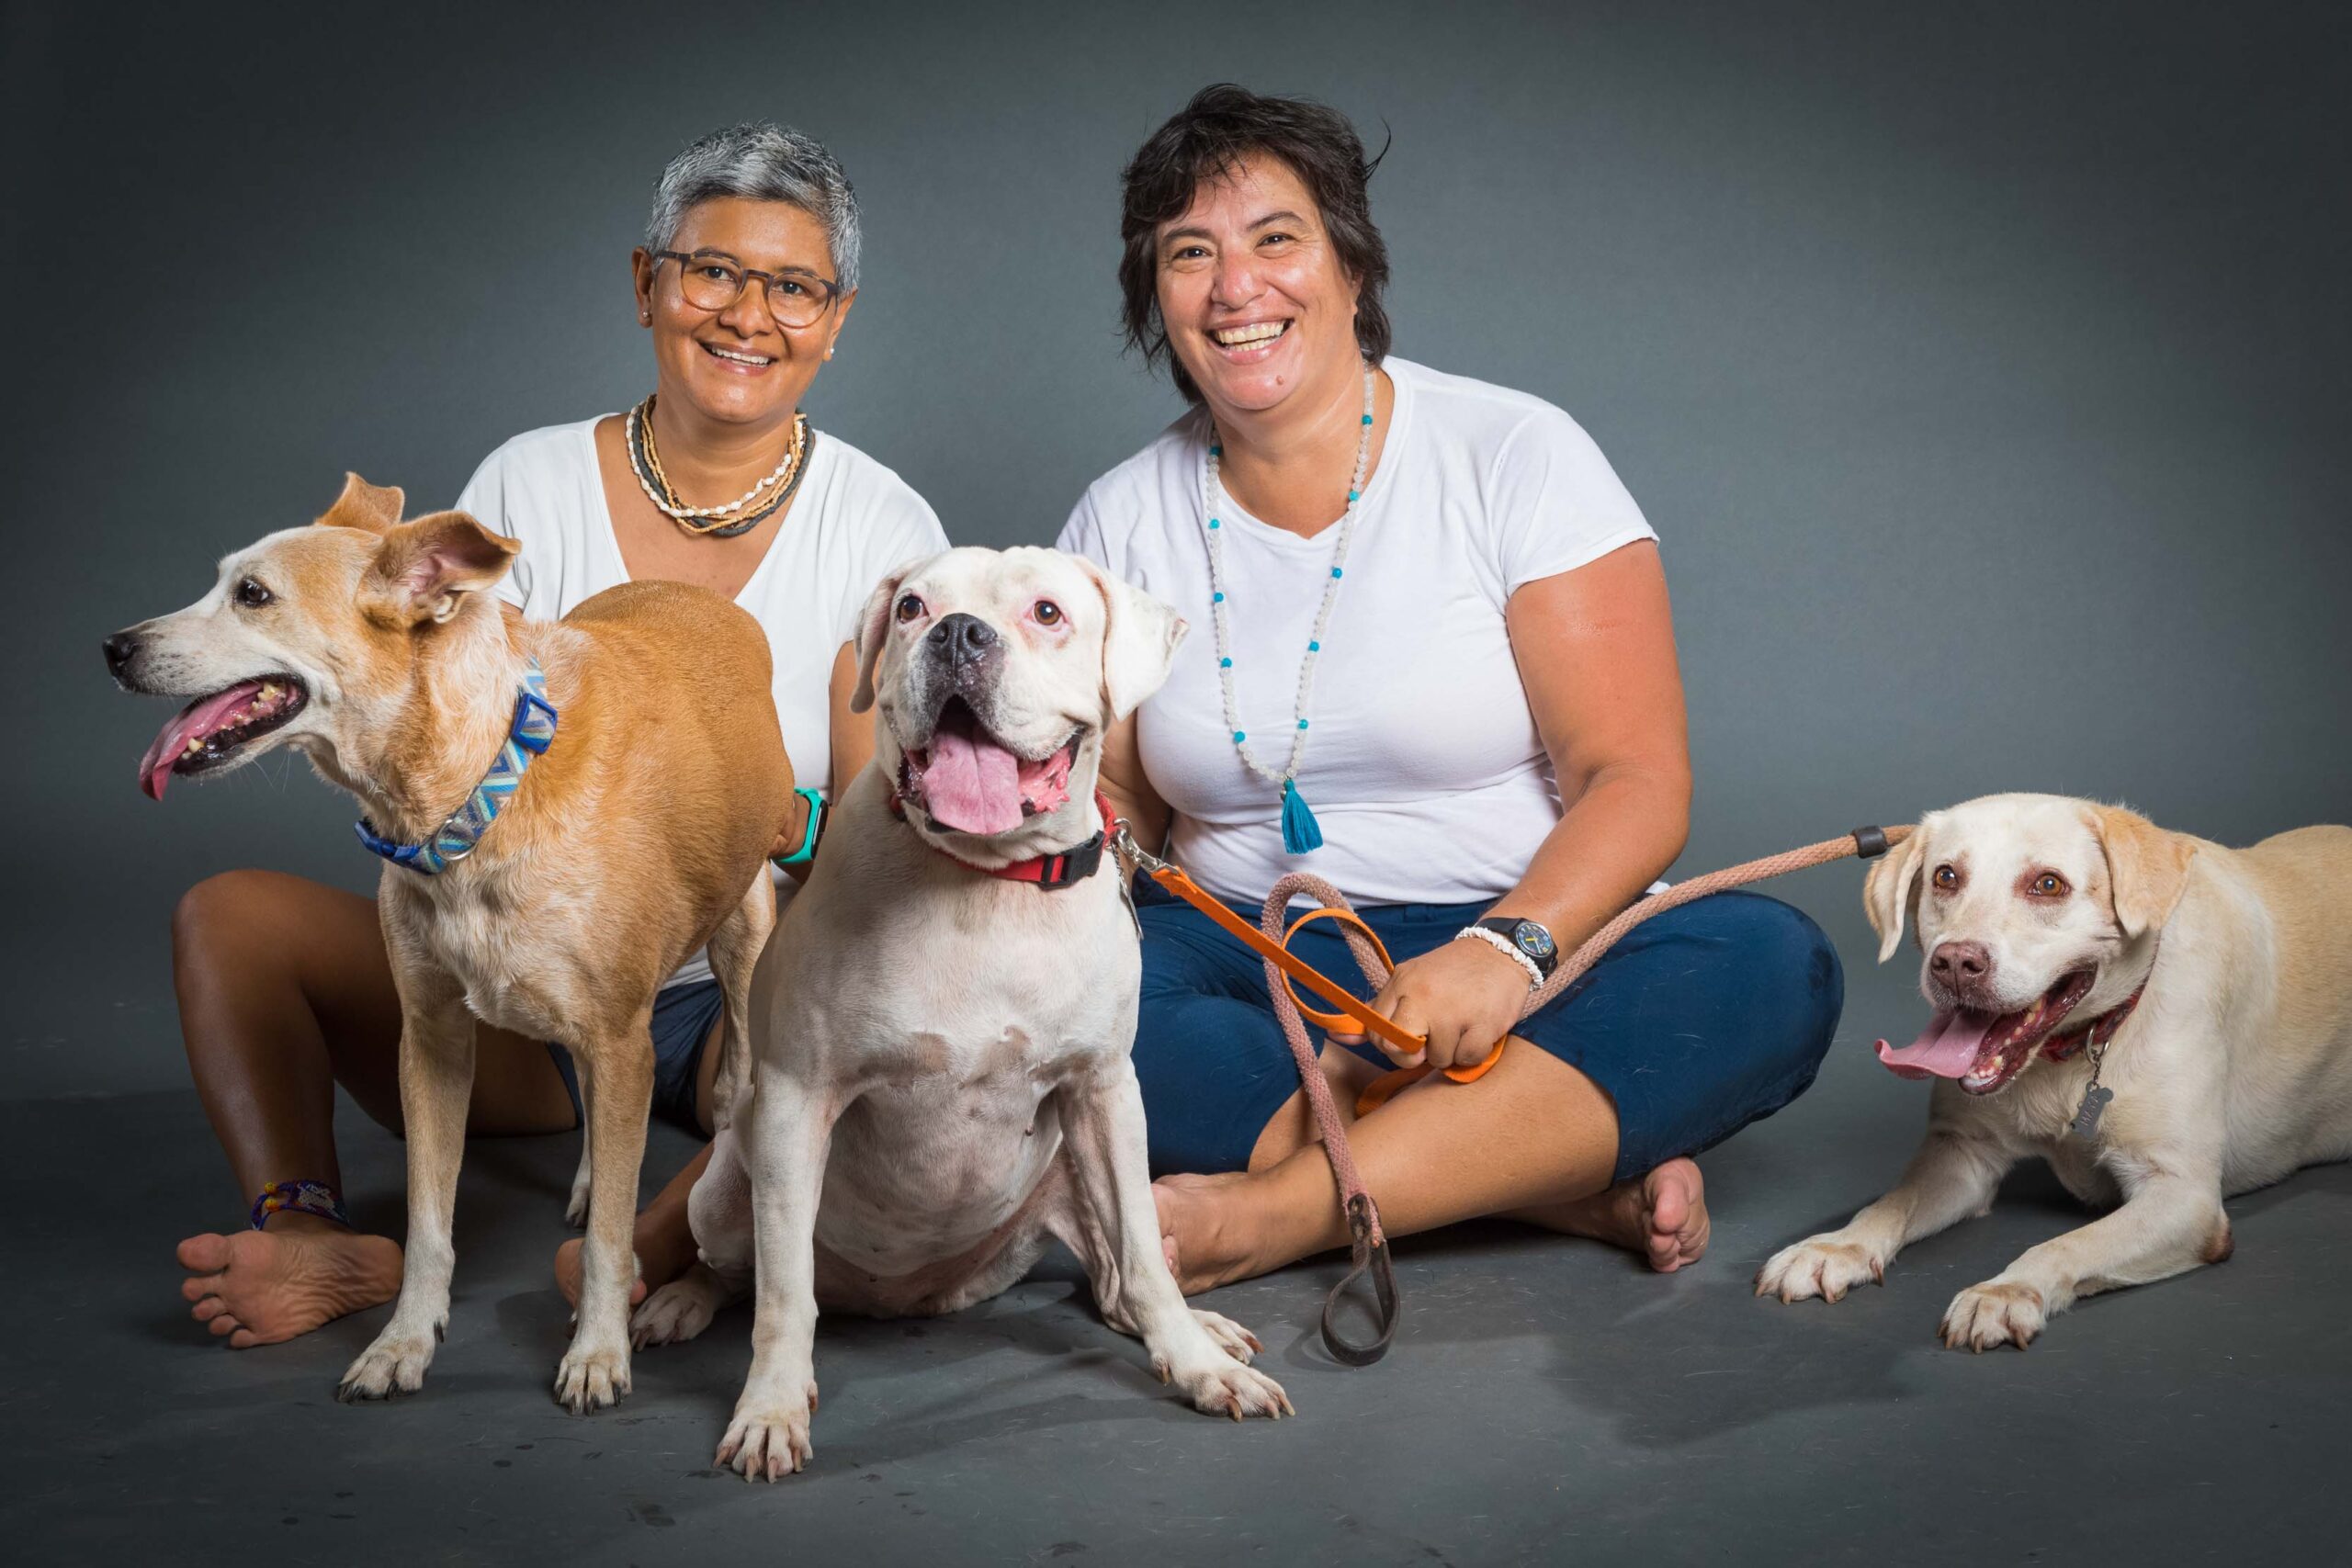 Star and Chacha, Foodie Guides from VALLARTA LOCAL FOOD TOURS posing with their three dogs; Chula, Comadrita and Maya.